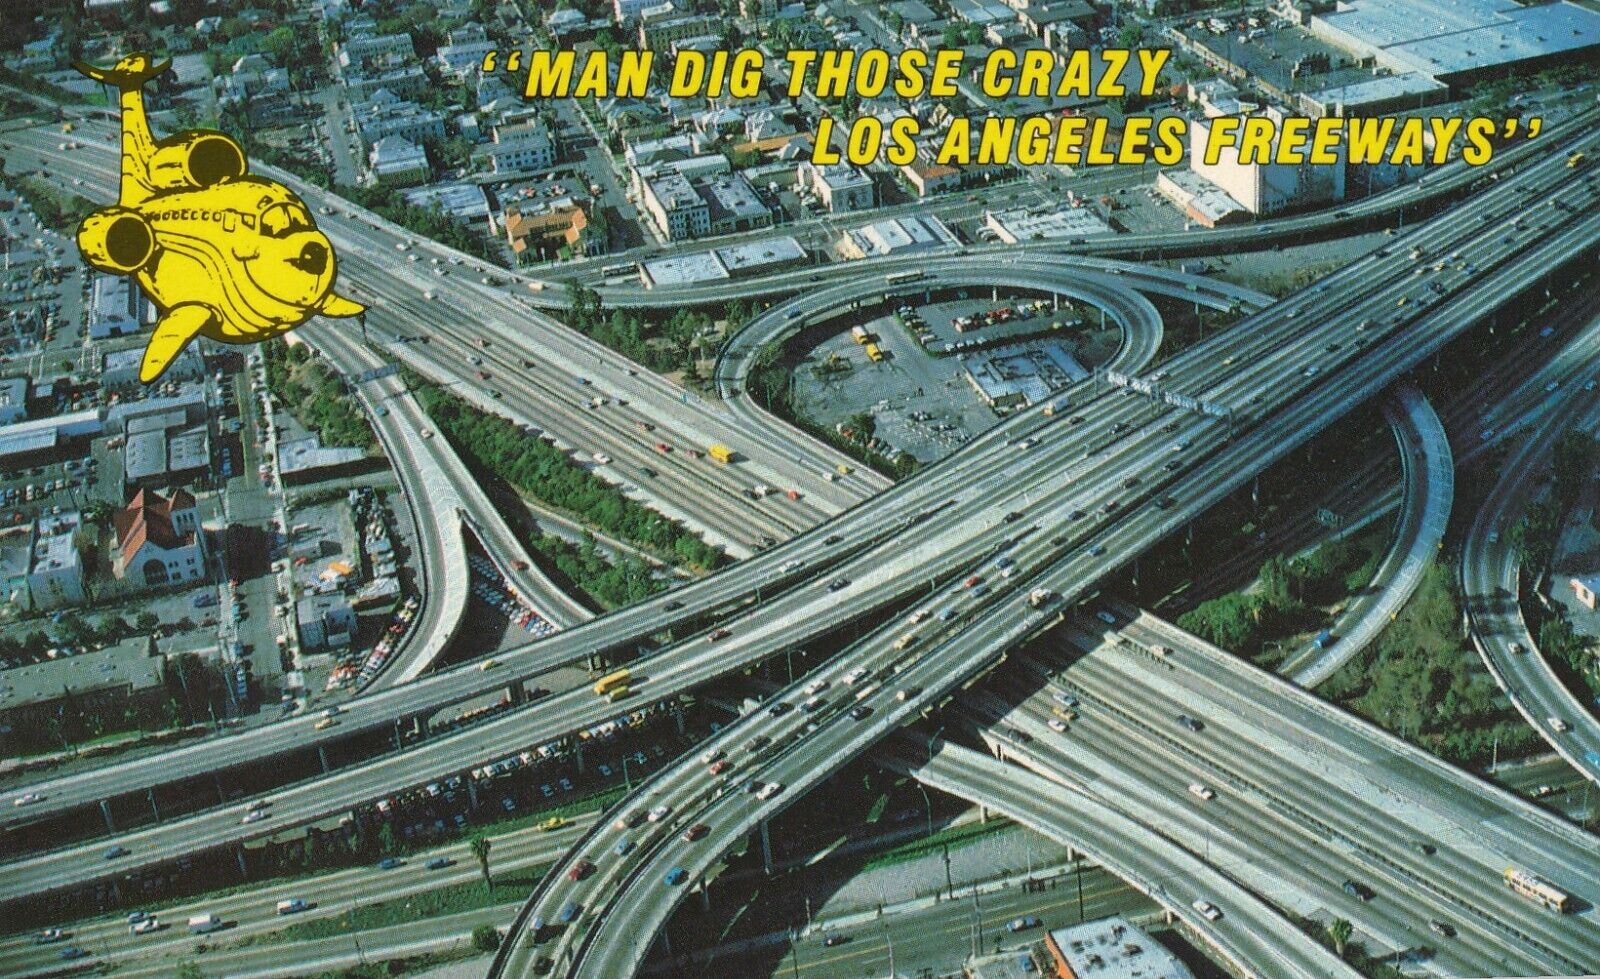 Aerial View of Crazy Los Angeles Freeways, California vintage unposted